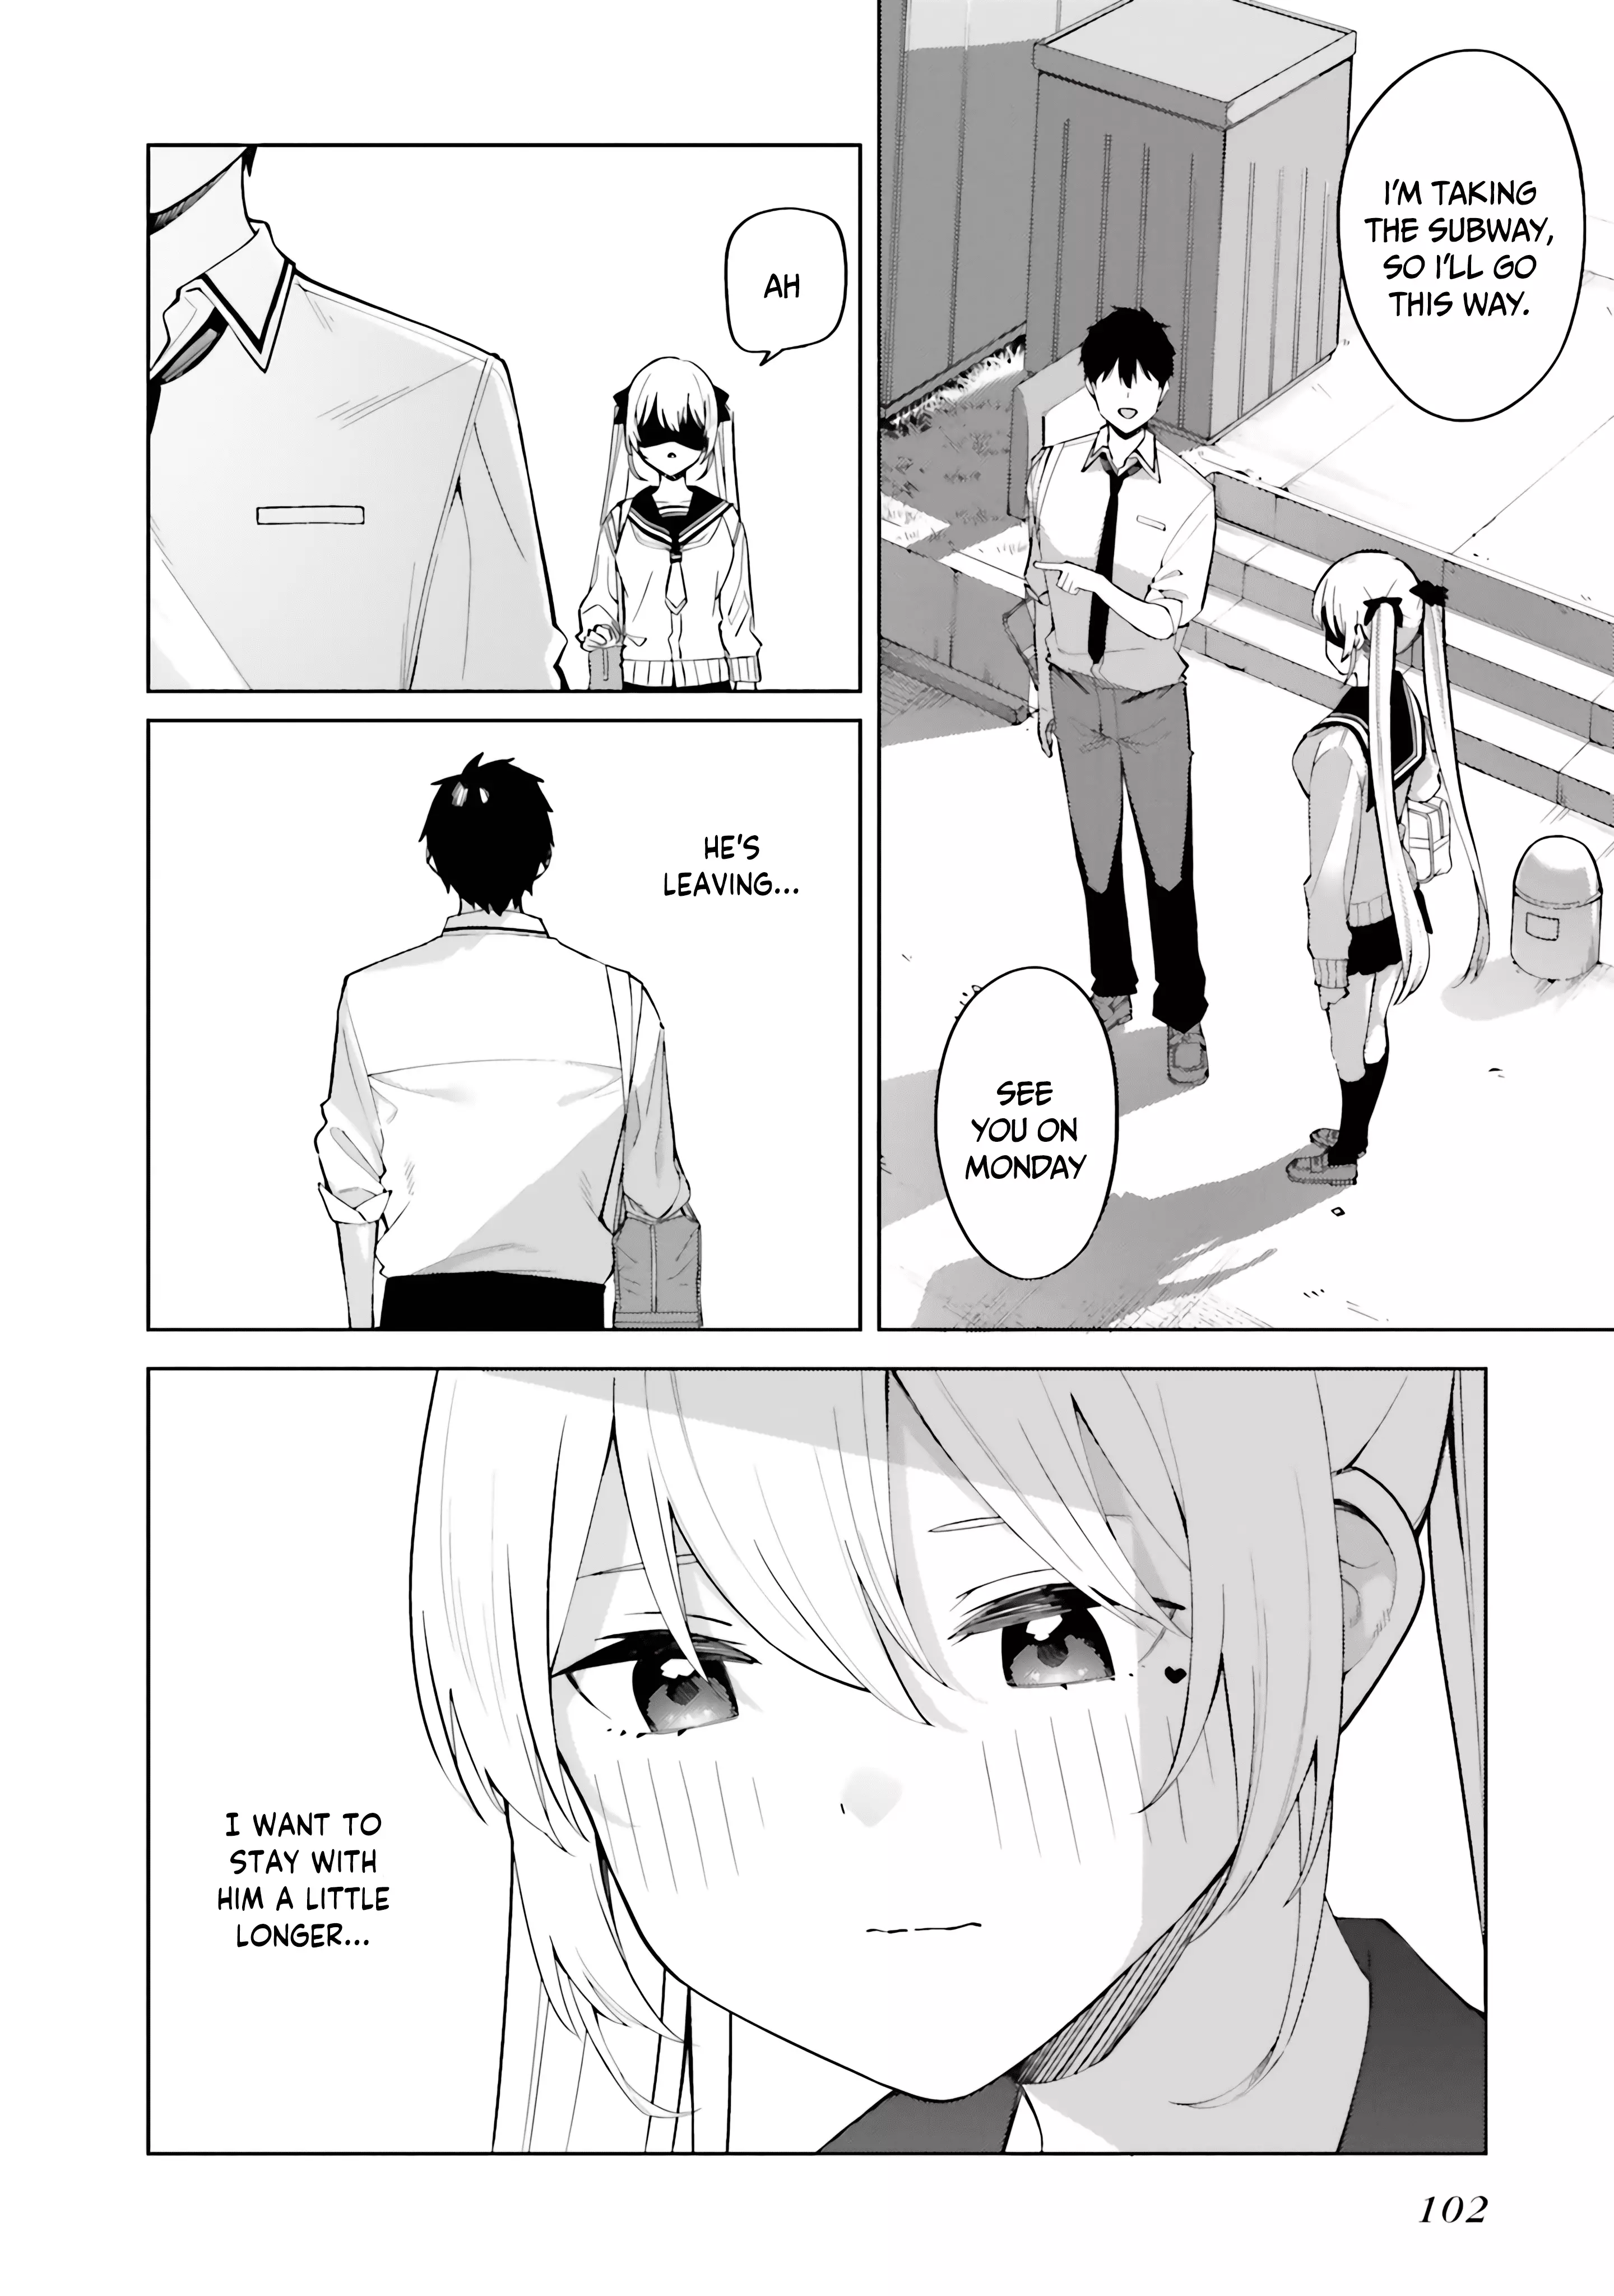 I Don't Understand Shirogane-San's Facial Expression At All - 16 page 11-a2e9ed64